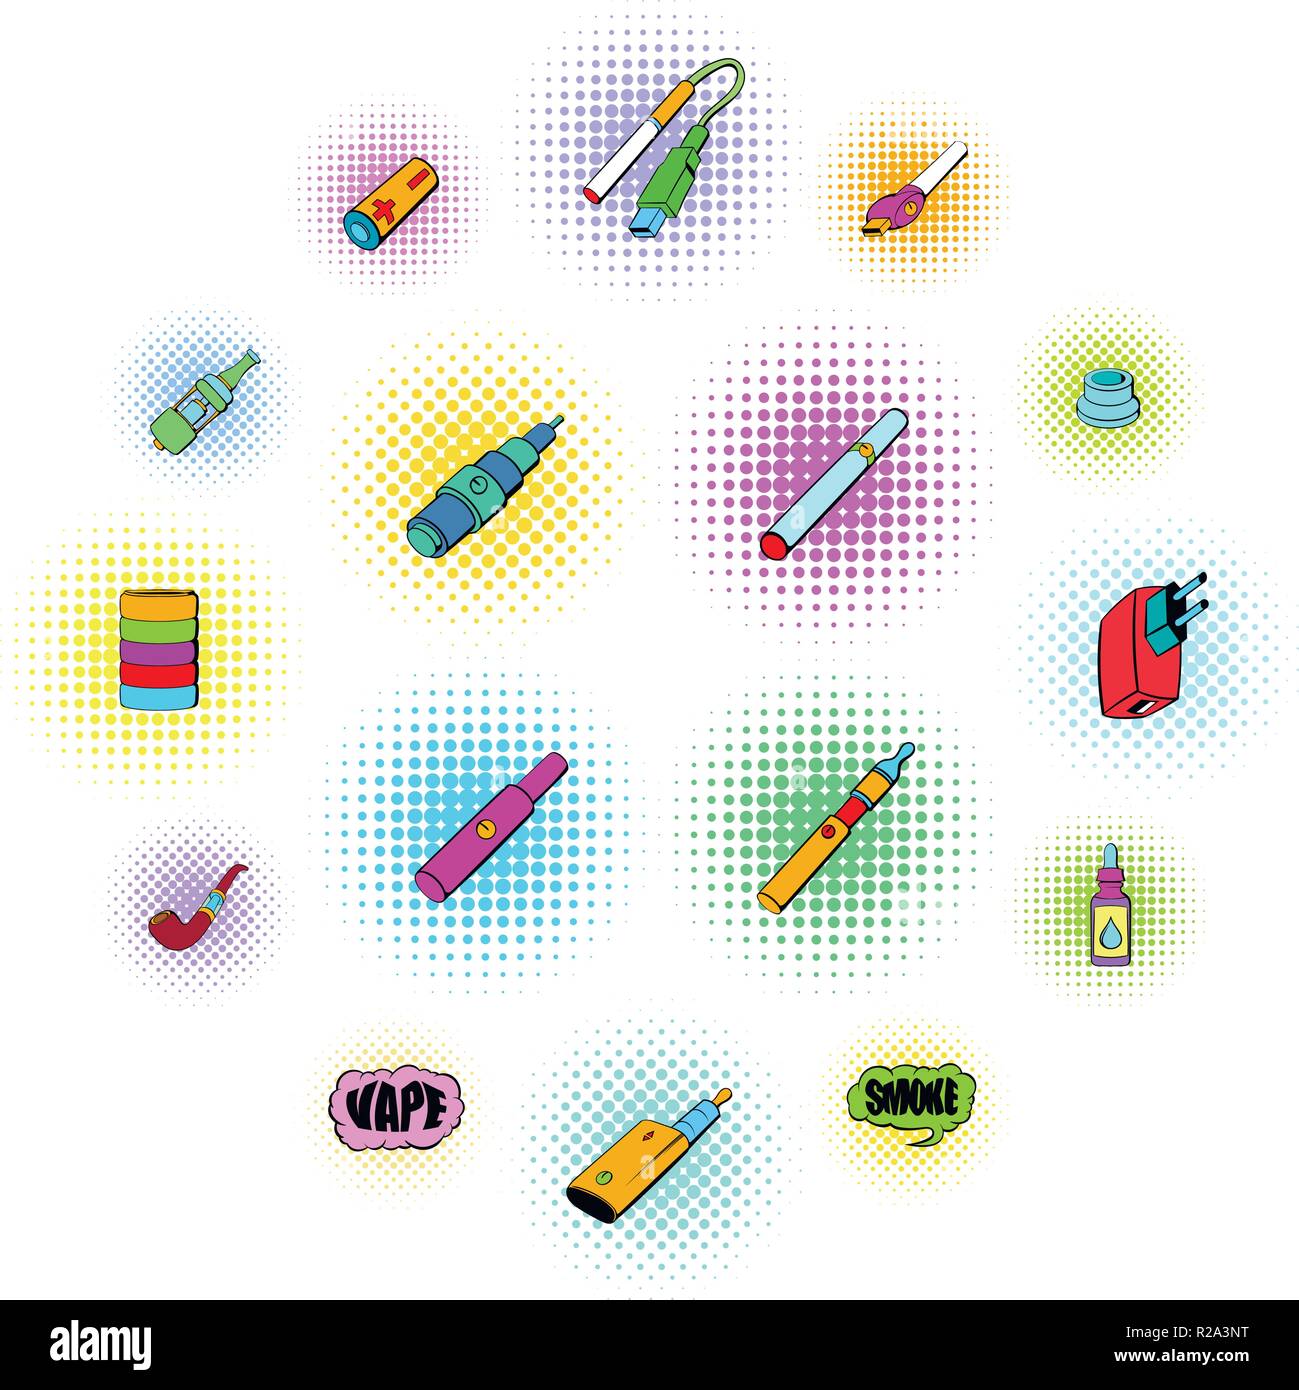 E-cigarettes icons set in comics style isolated on white Stock Vector